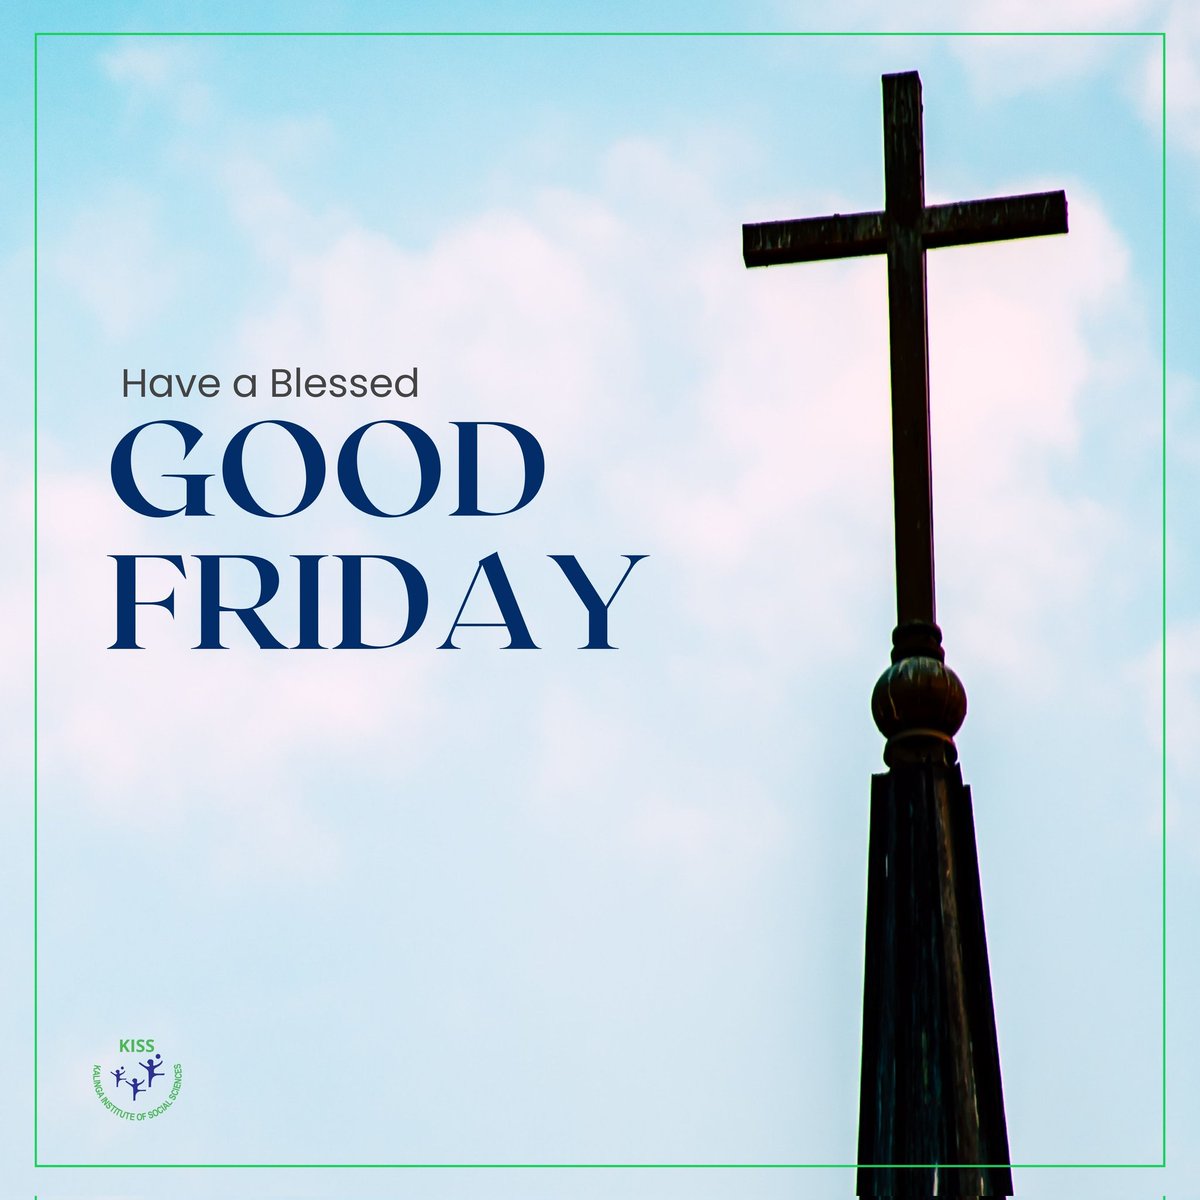 May the seriousness of Good Friday inspire hope and renewal for all . . . #GoodFriday #KISS #Wishes